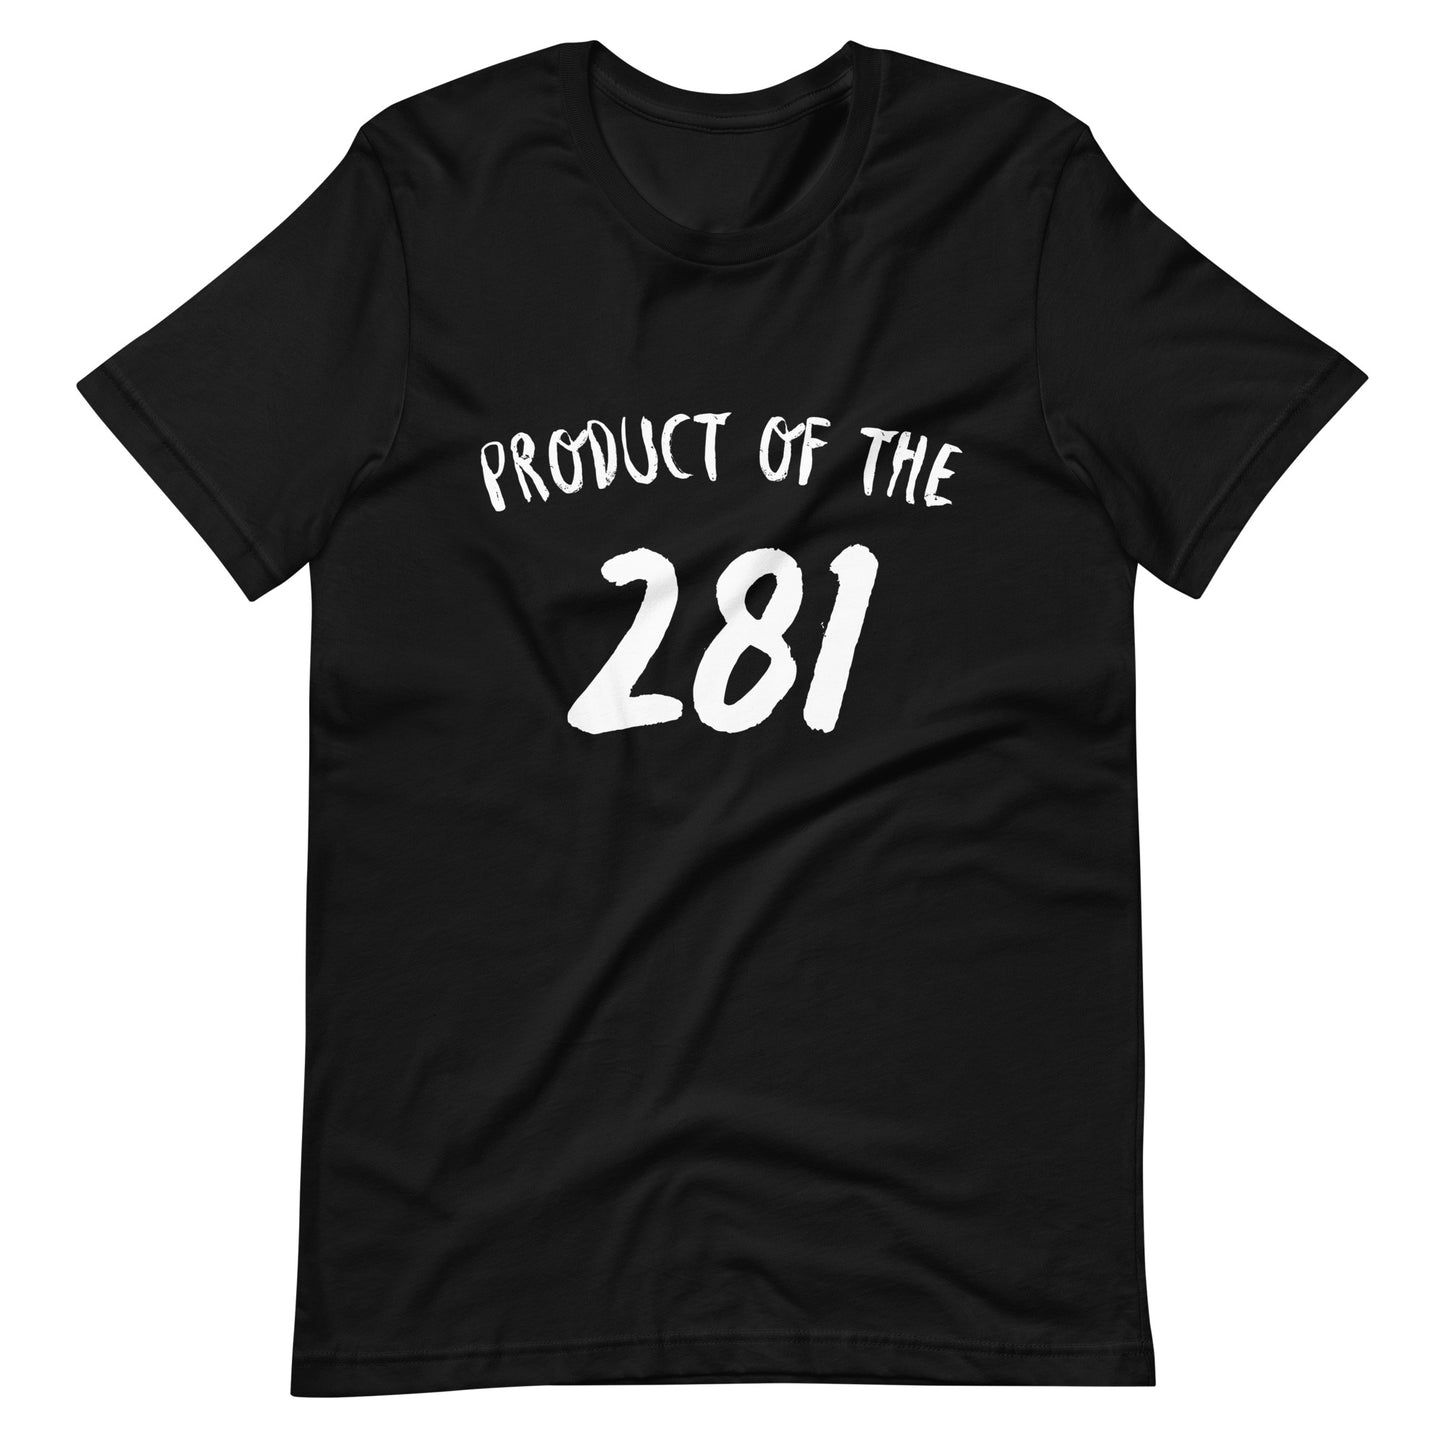 Product of the "281" Unisex t-shirt